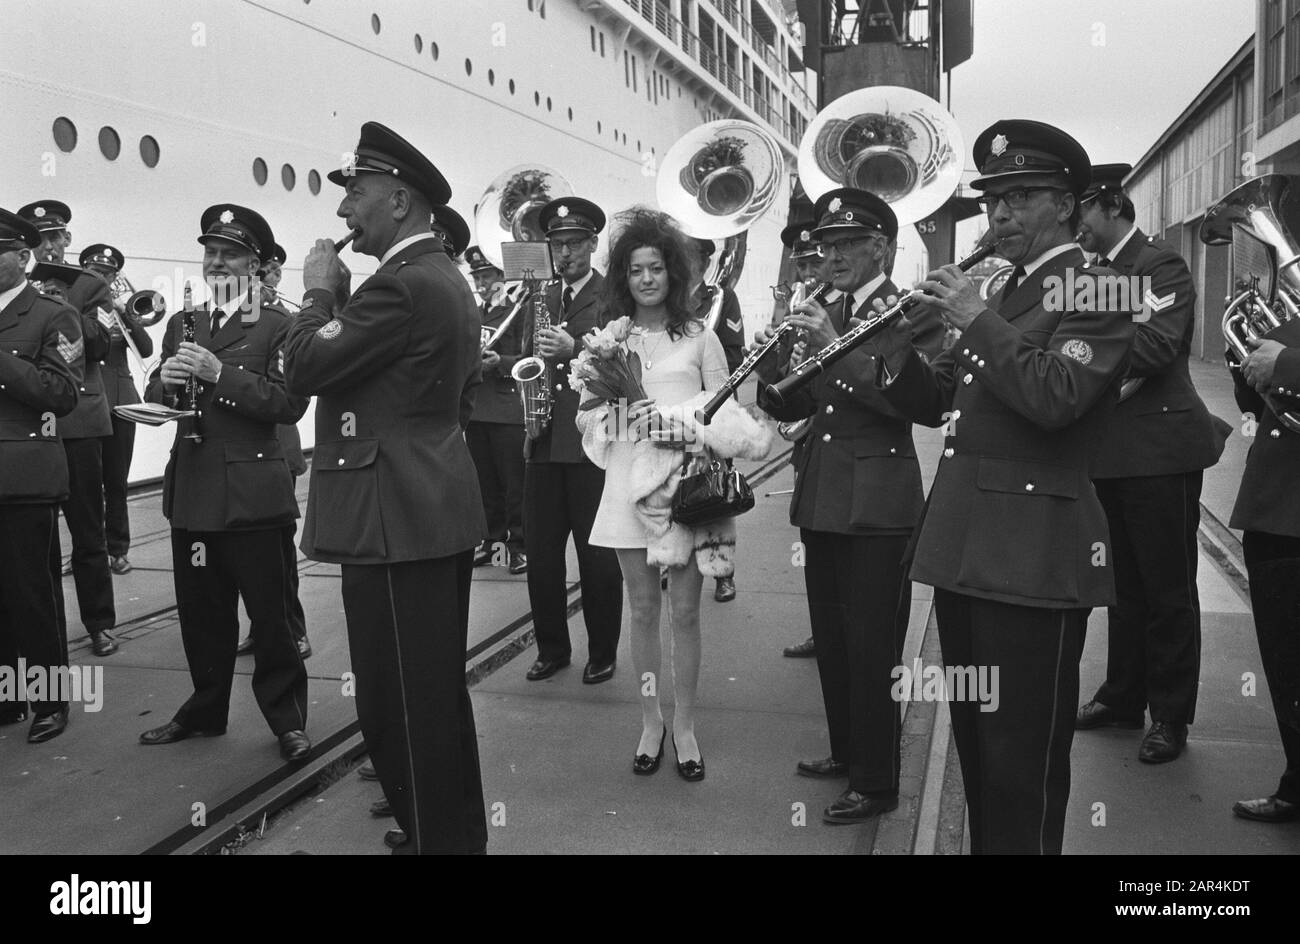 Contestants at the Miss Holland 1971 election on the cruise ship Himalayan  A participant between the members of the music band Date: May 7, 1971 Location: Amsterdam, Noord-Holland Keywords: misselections, music bands, ships Institution name: Miss Holland Stock Photo